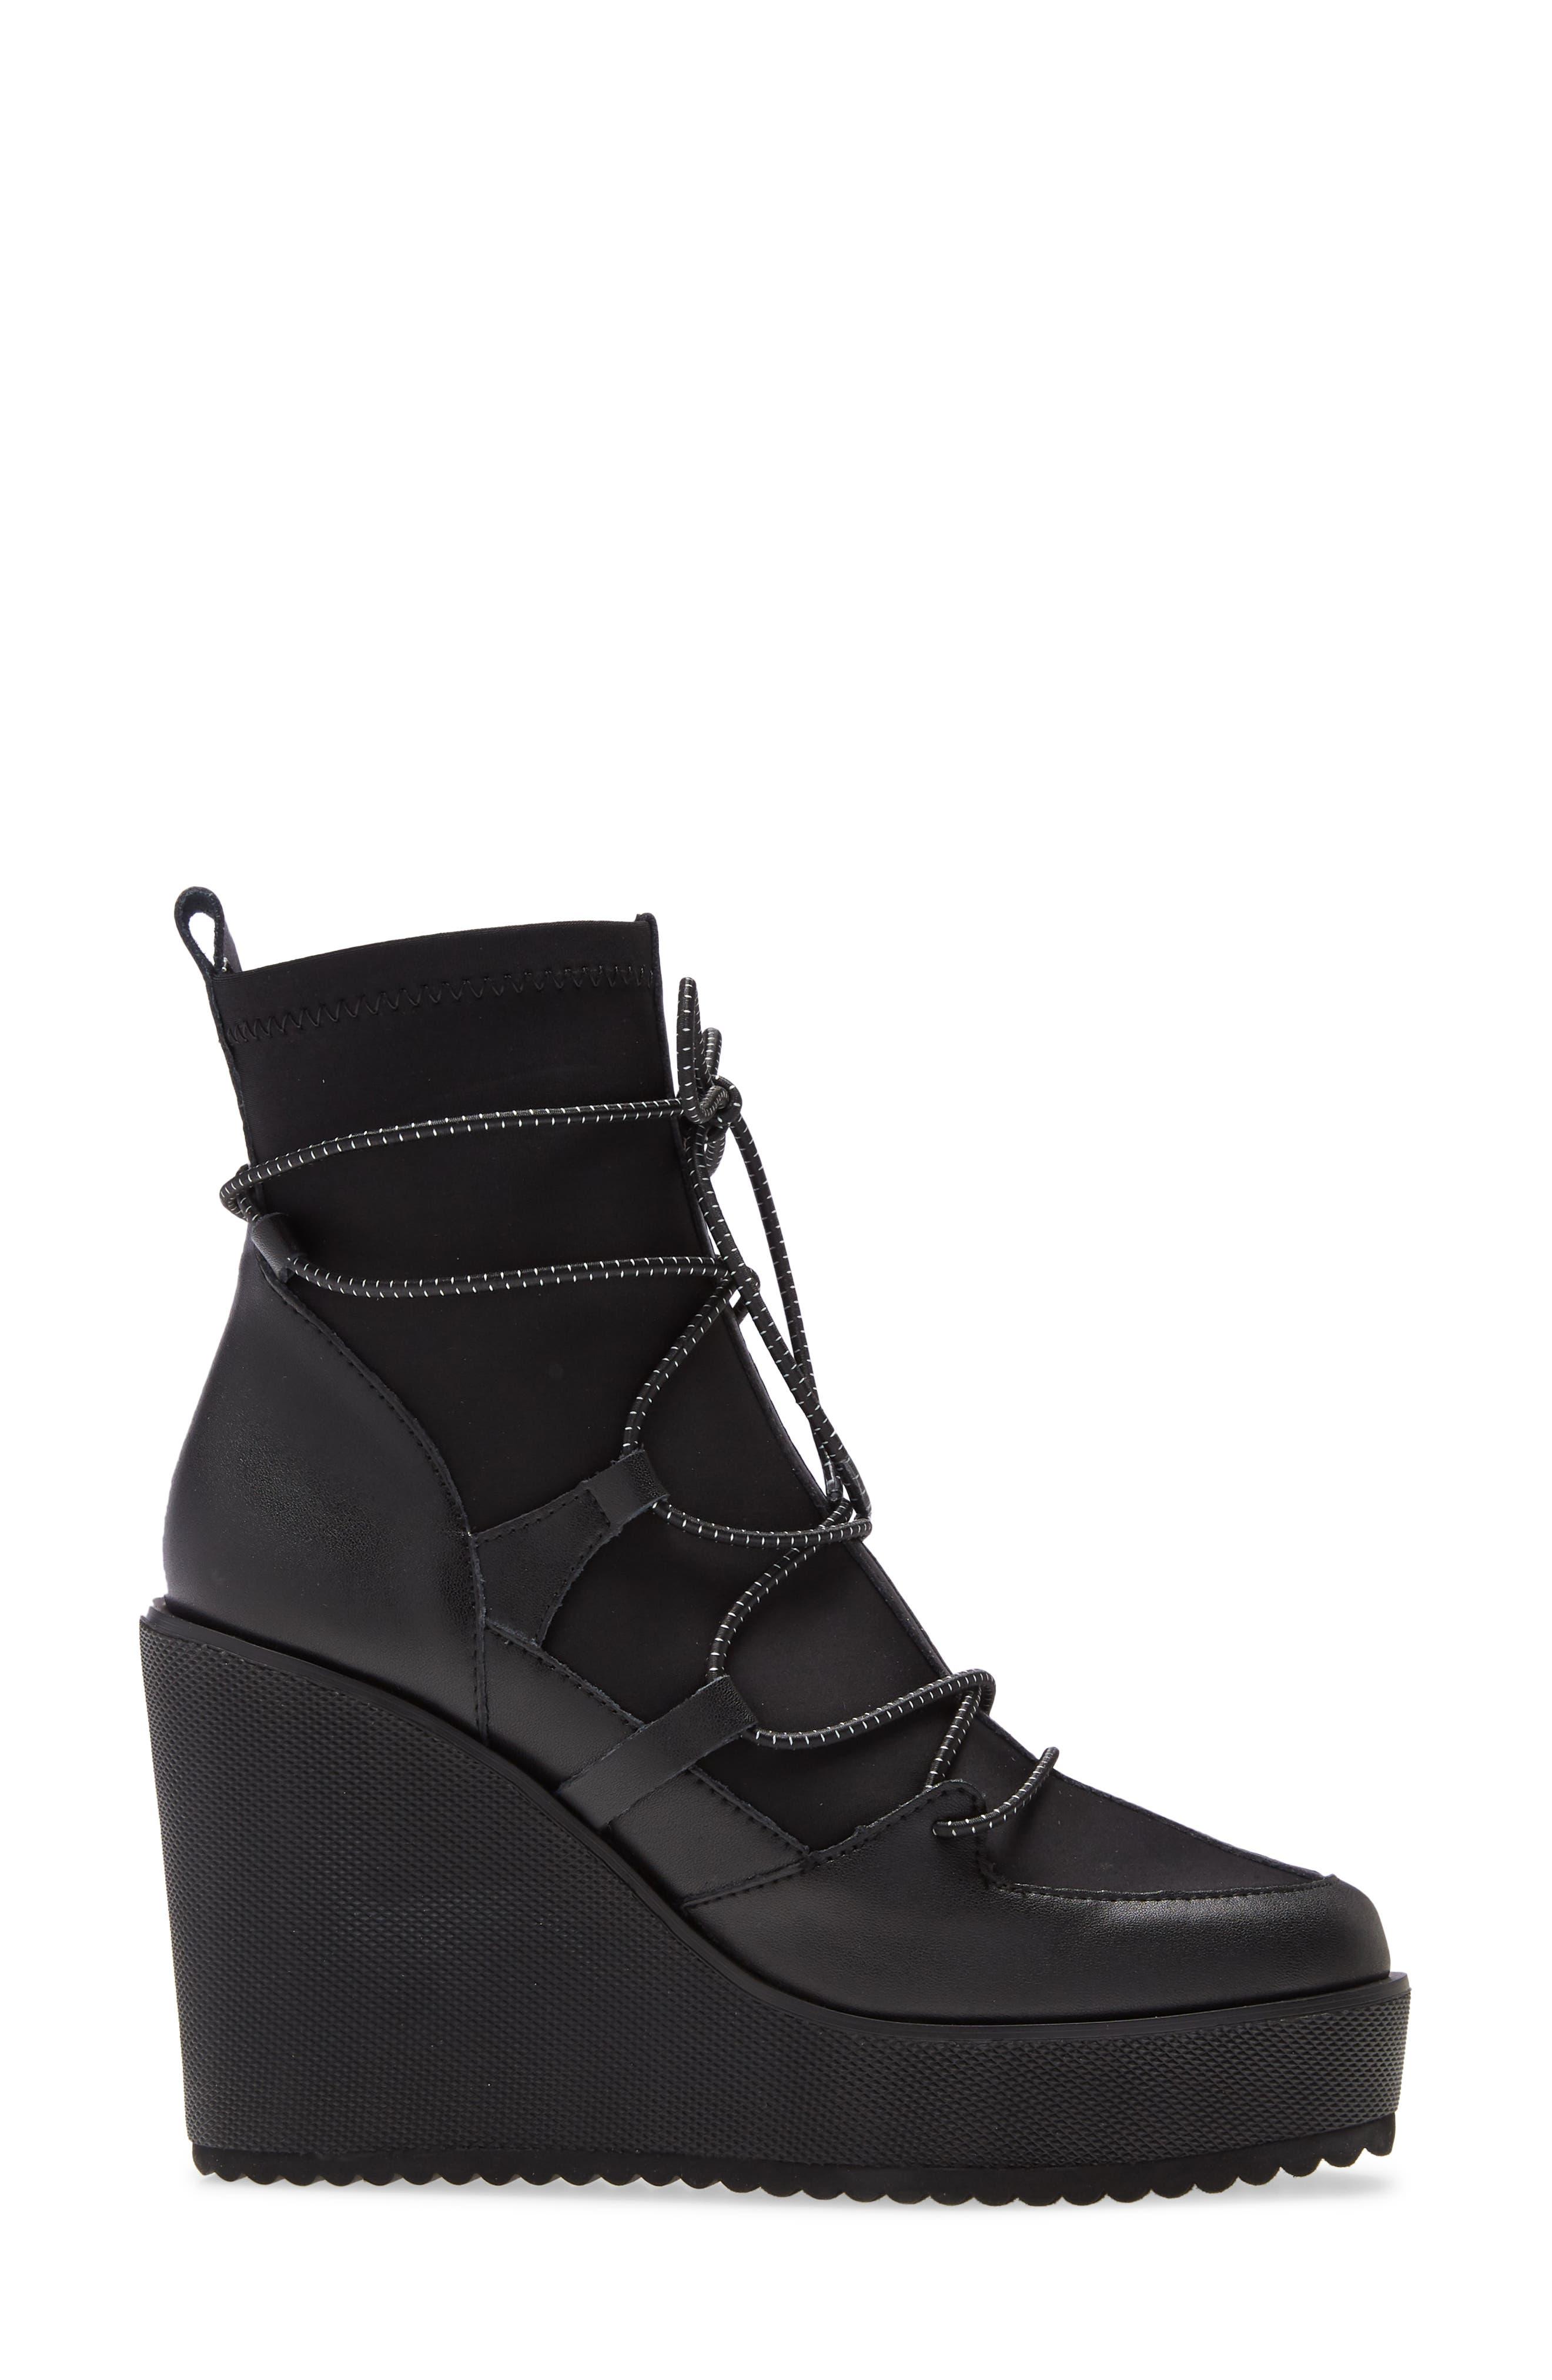 Steve Madden Atomic Wedge Lace-up Bootie in Black | Lyst